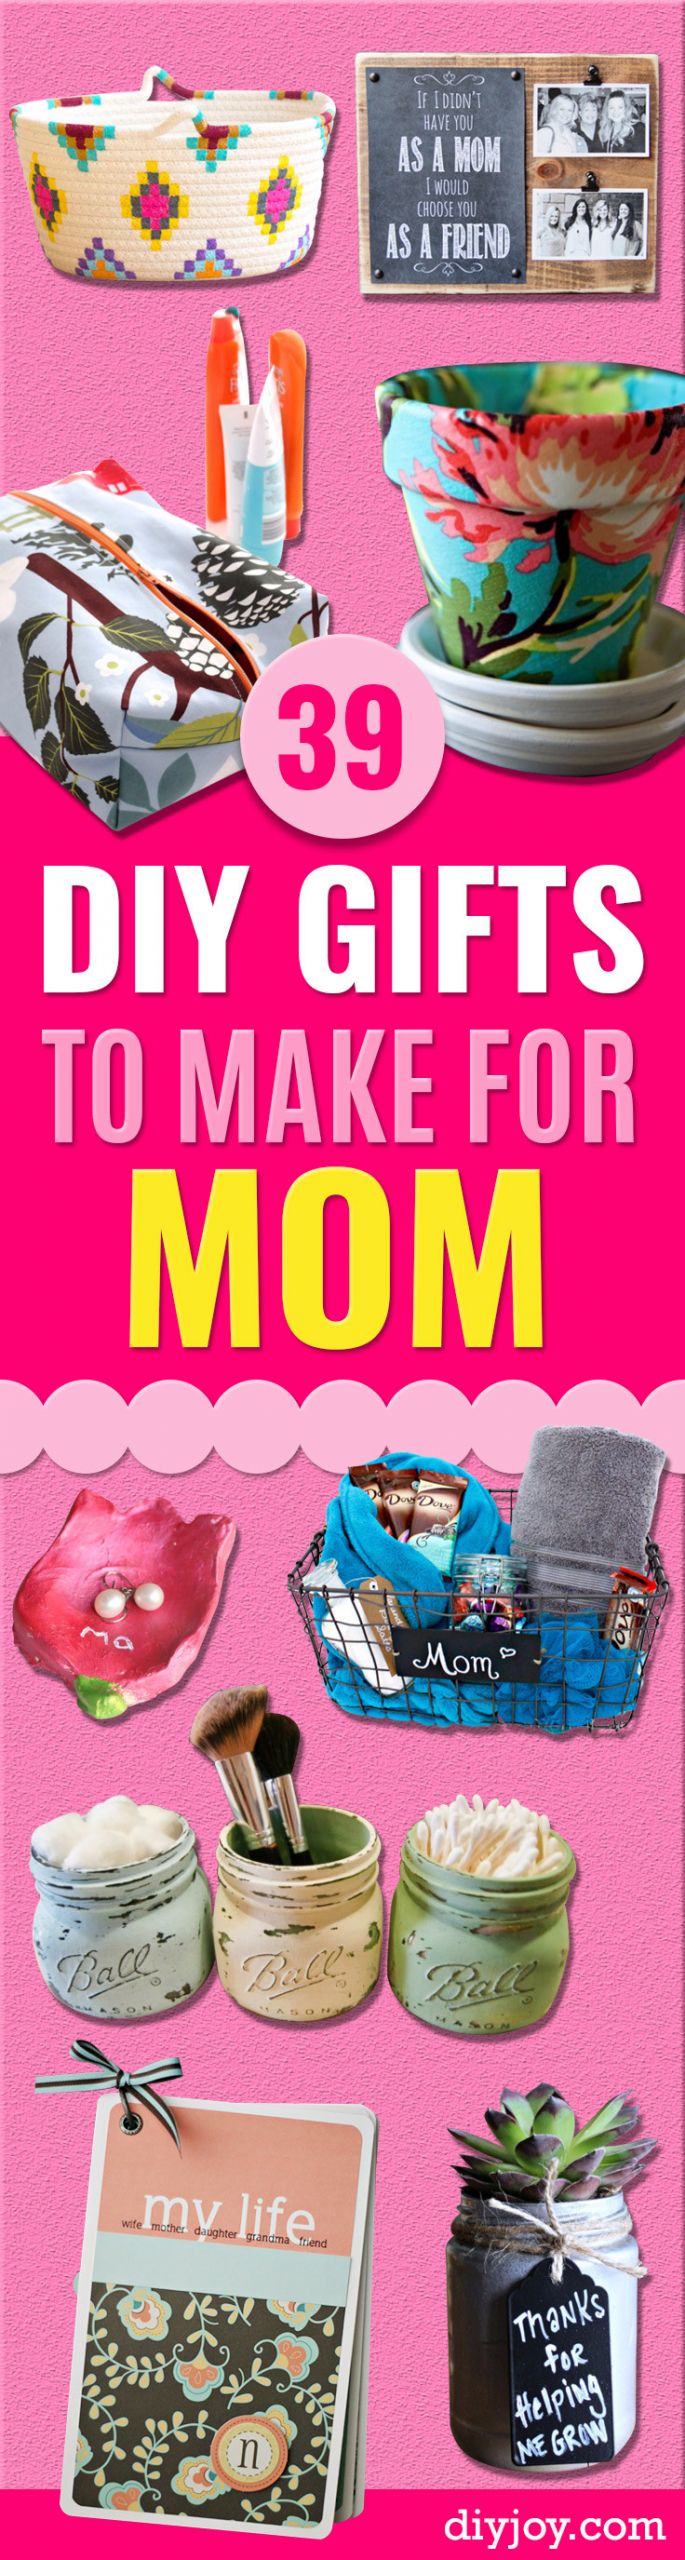 DIY Gifts For Mom Birthday
 39 Creative DIY Gifts to Make for Mom